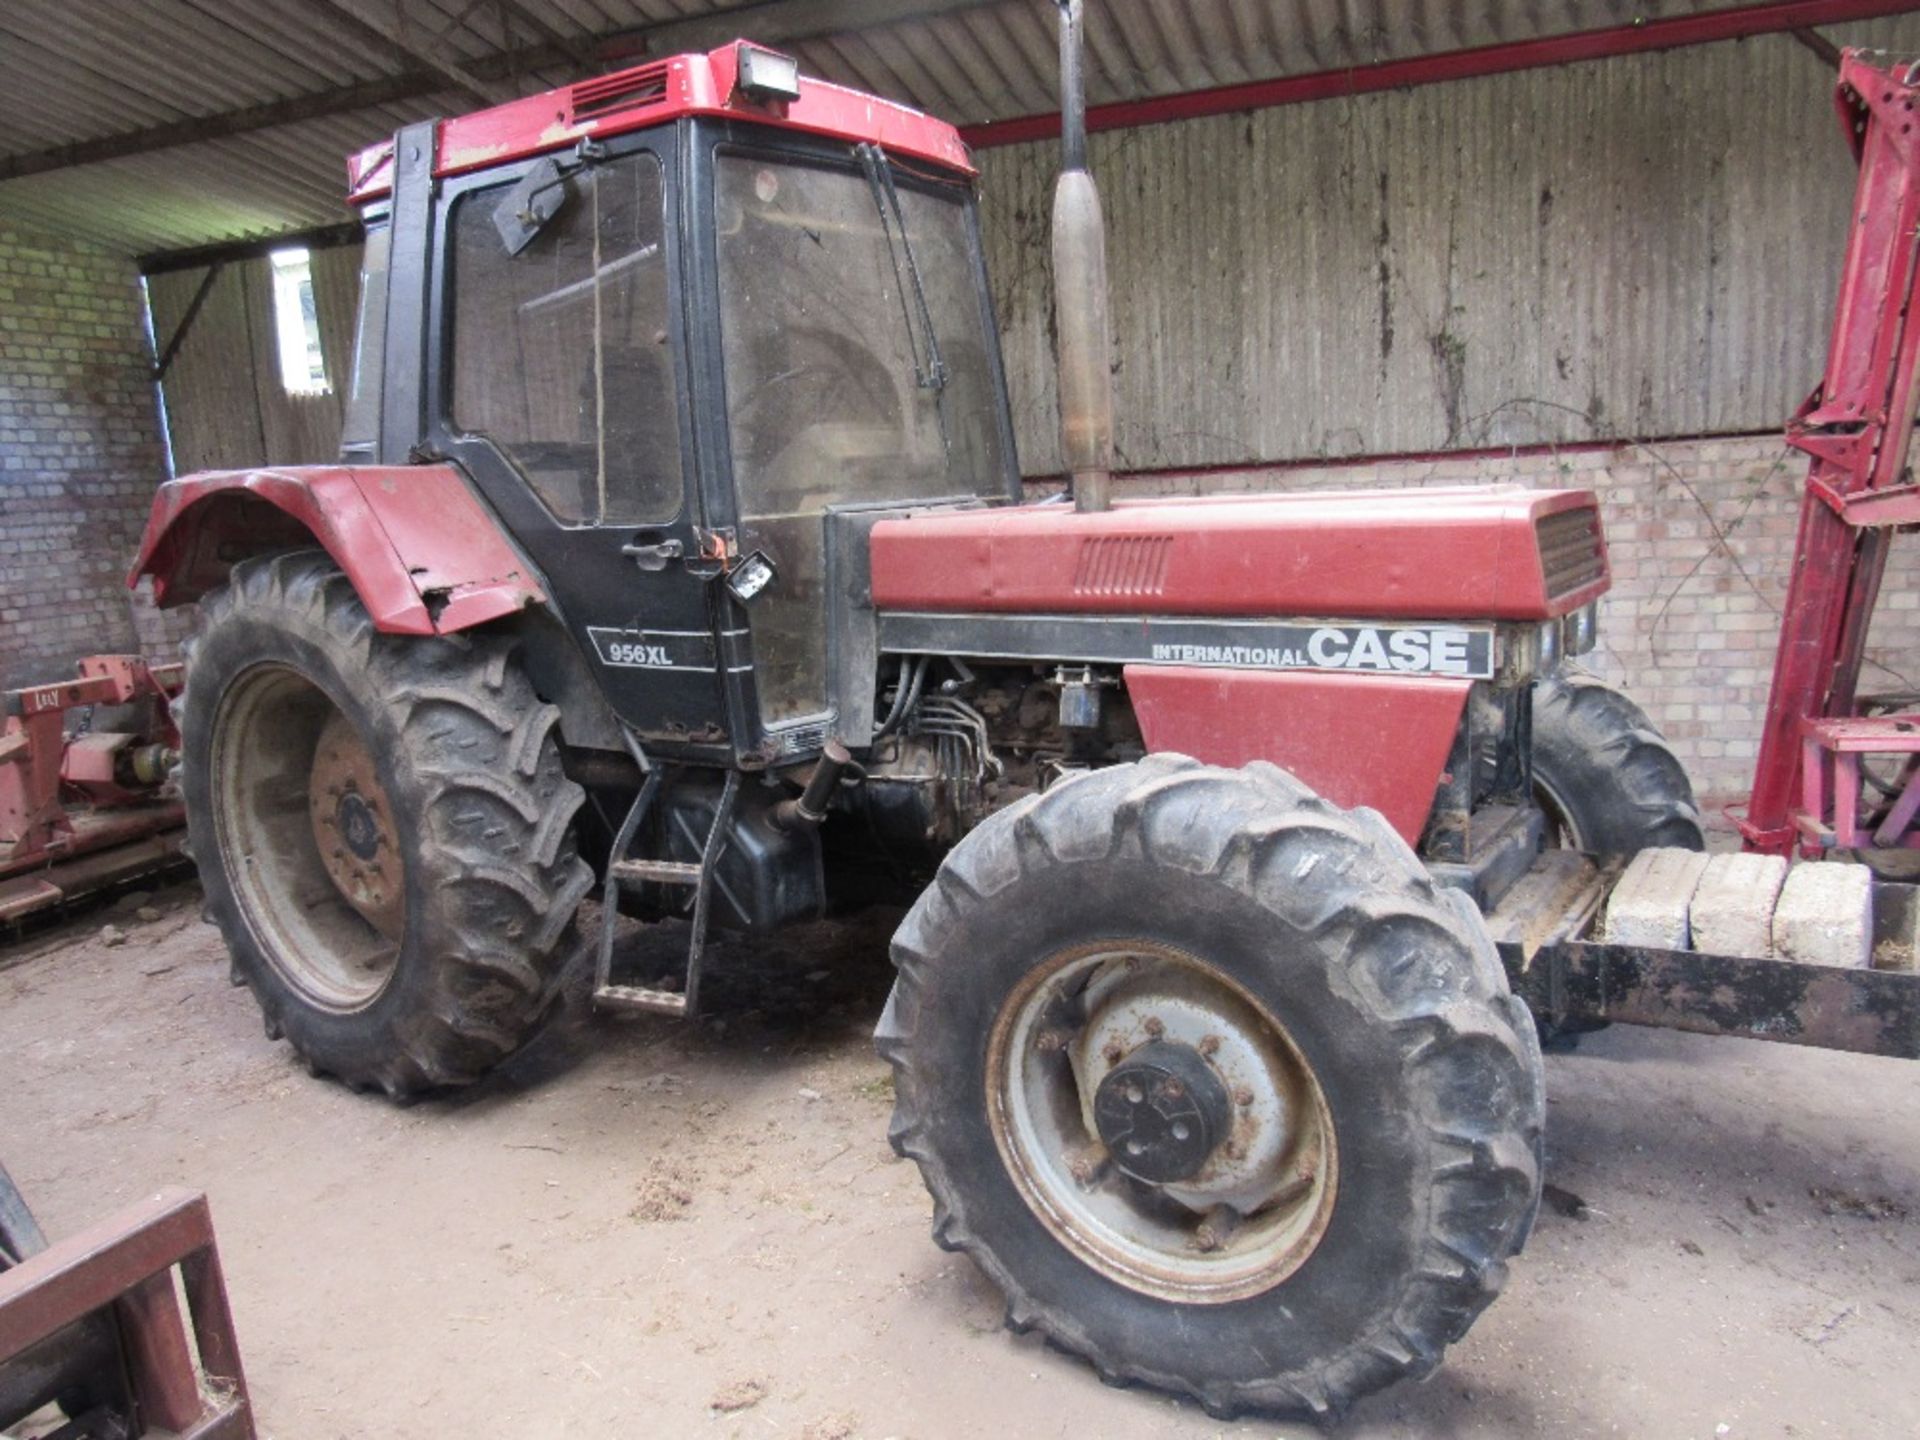 Case International Tractor 956XL, 4wd, Reg: F802 RPV, 5,700 hours, - Image 10 of 14